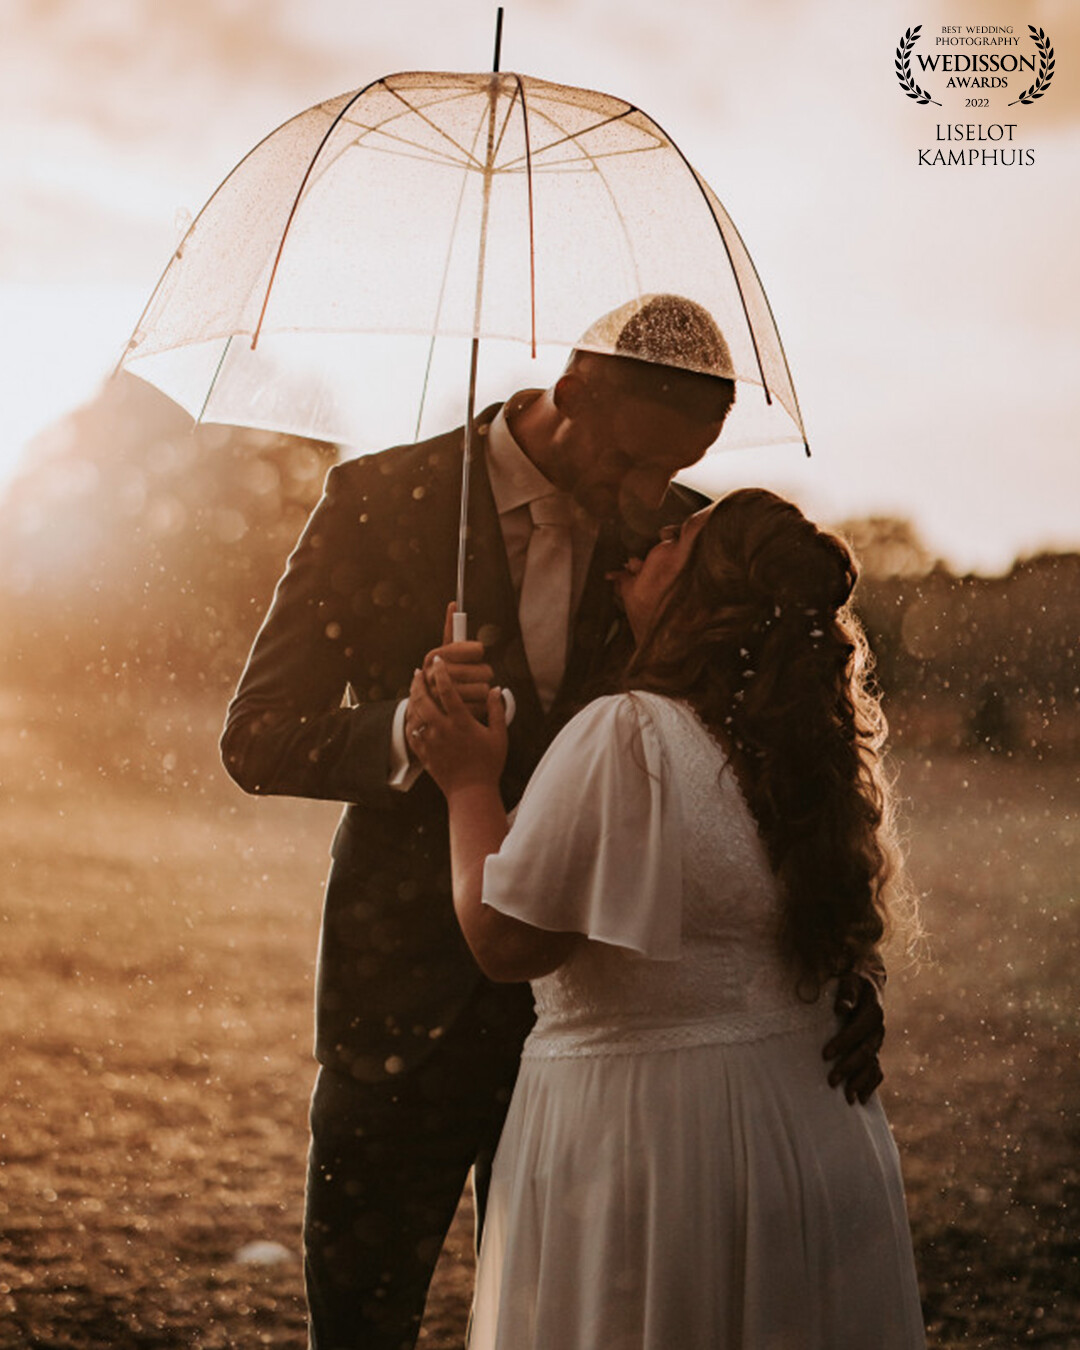 It rained very hard this evening and then I saw the sun coming trough. I ran to the bride en said "we have to take a picture outside, NOW!" We quickly went to an open field and catched a beautiful golden 5 minutes in the rain.